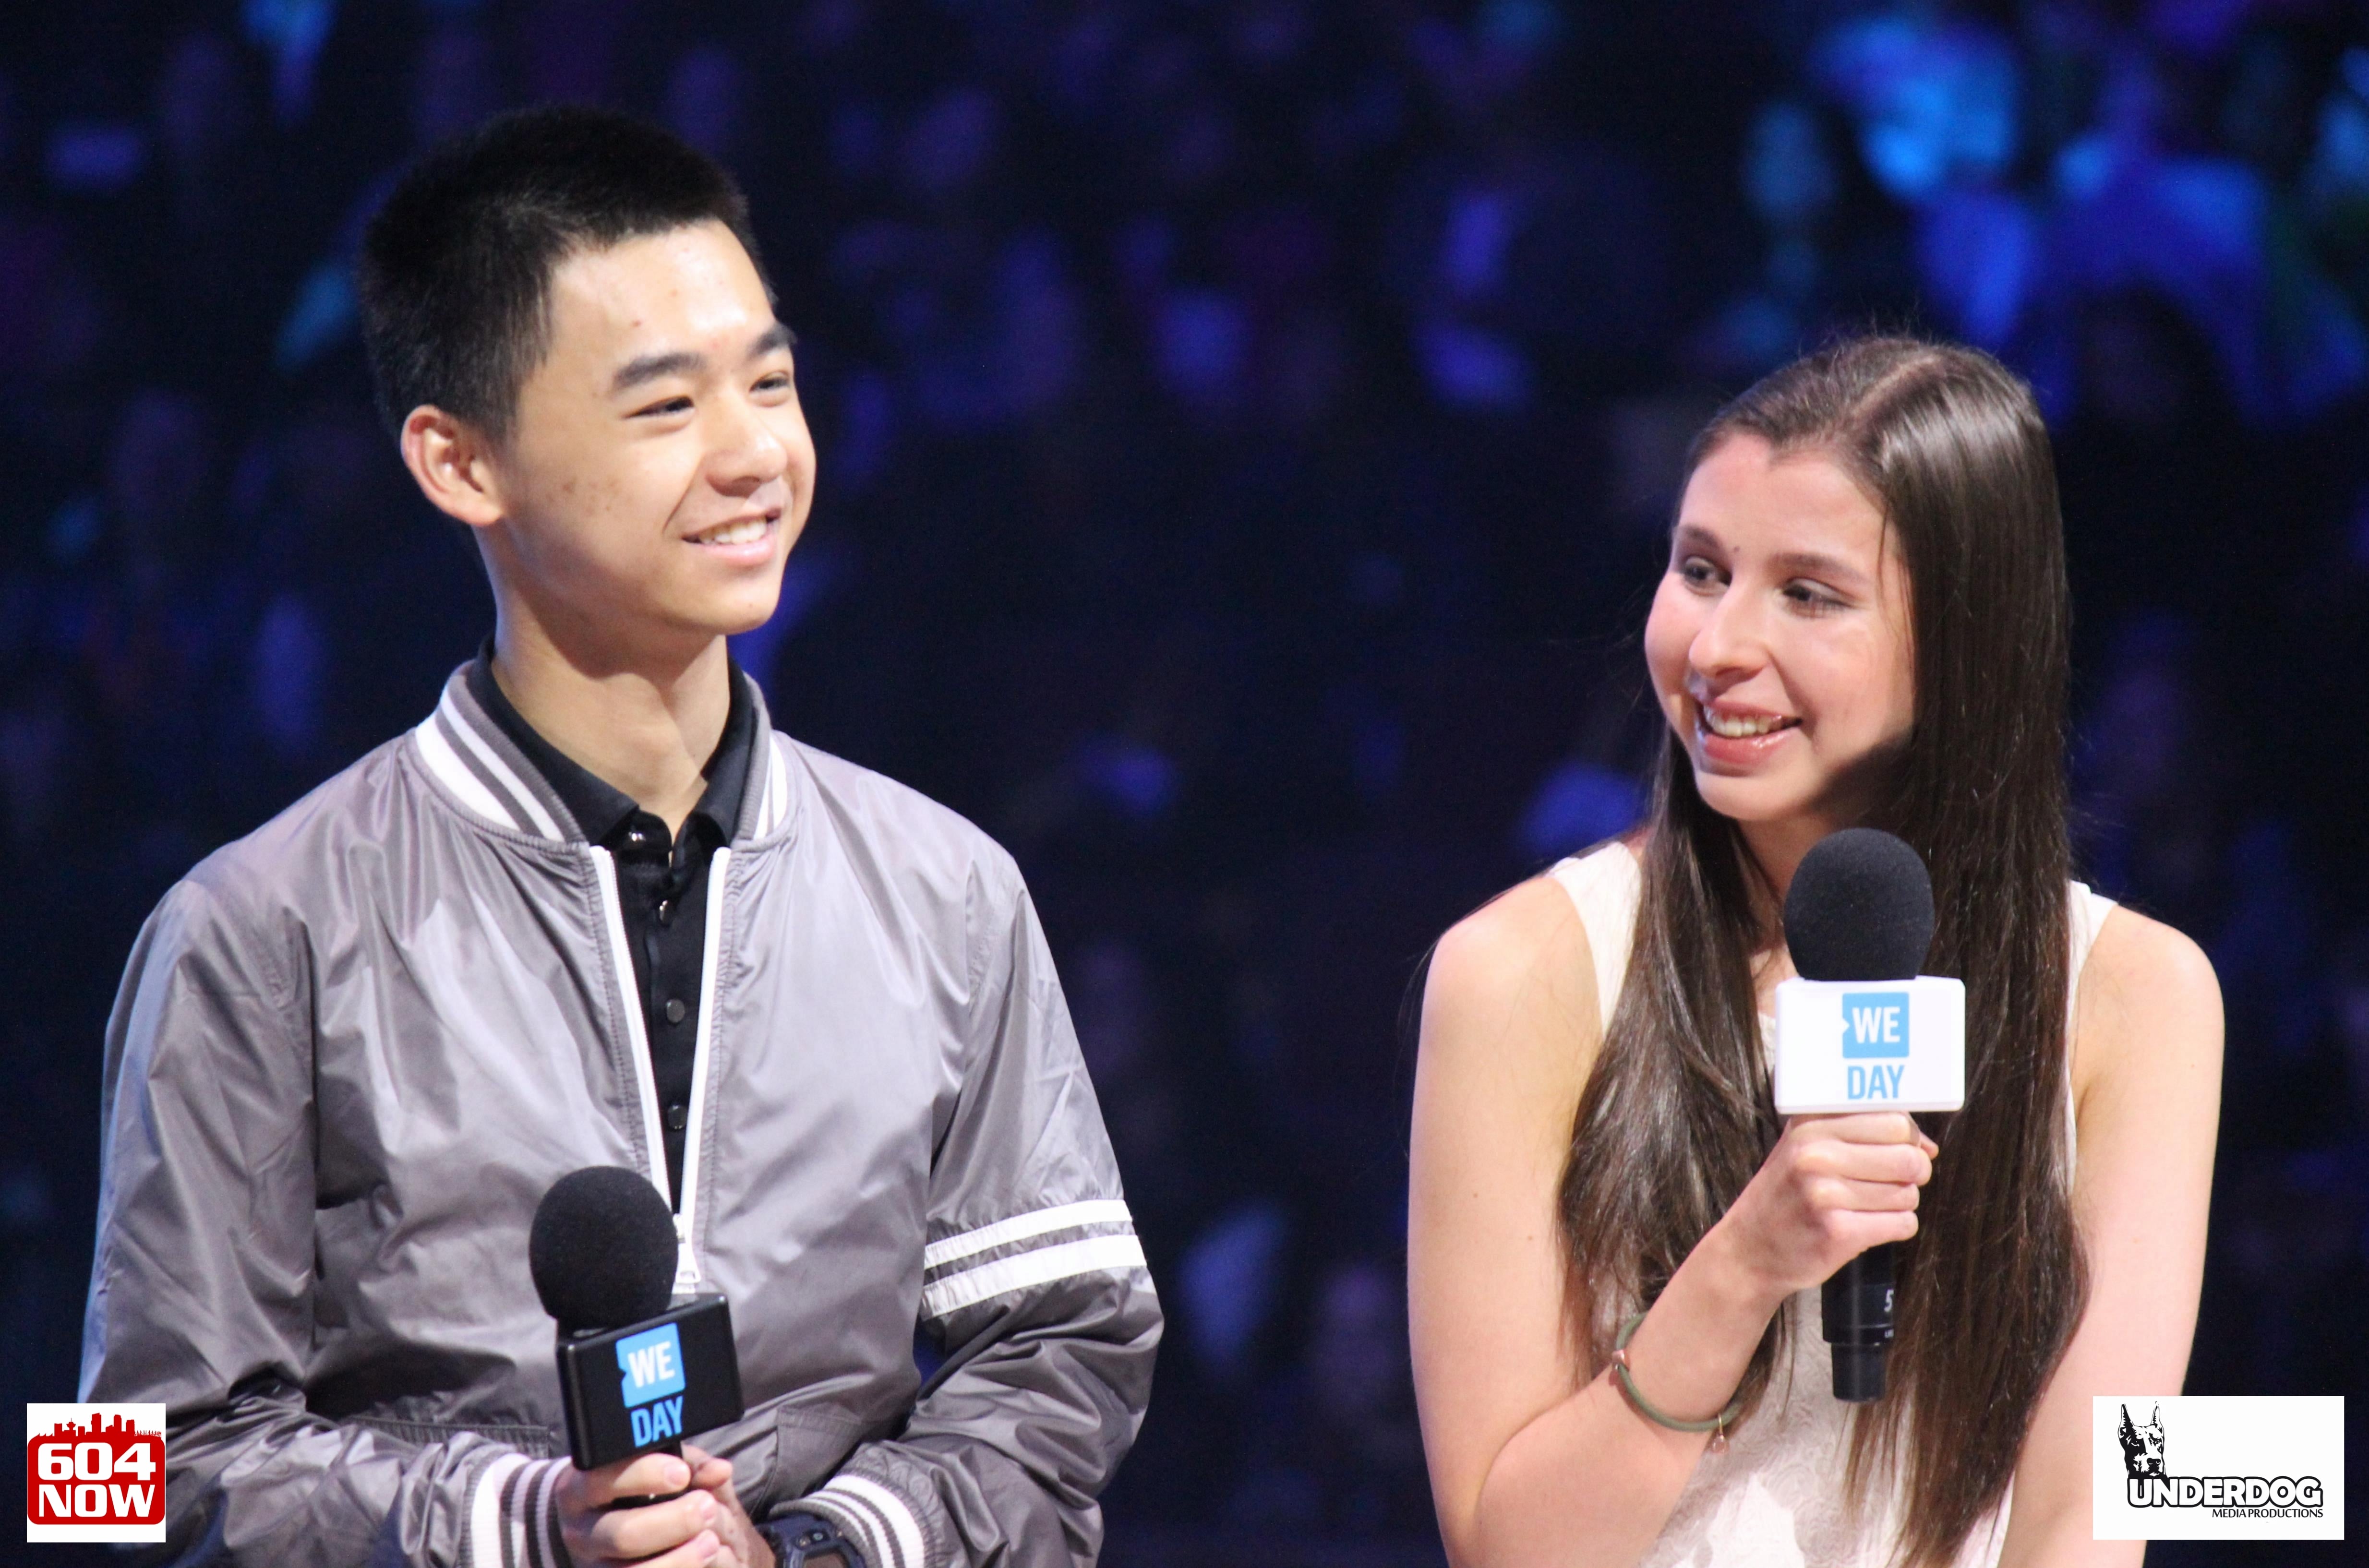 We Day Vancouver 2015